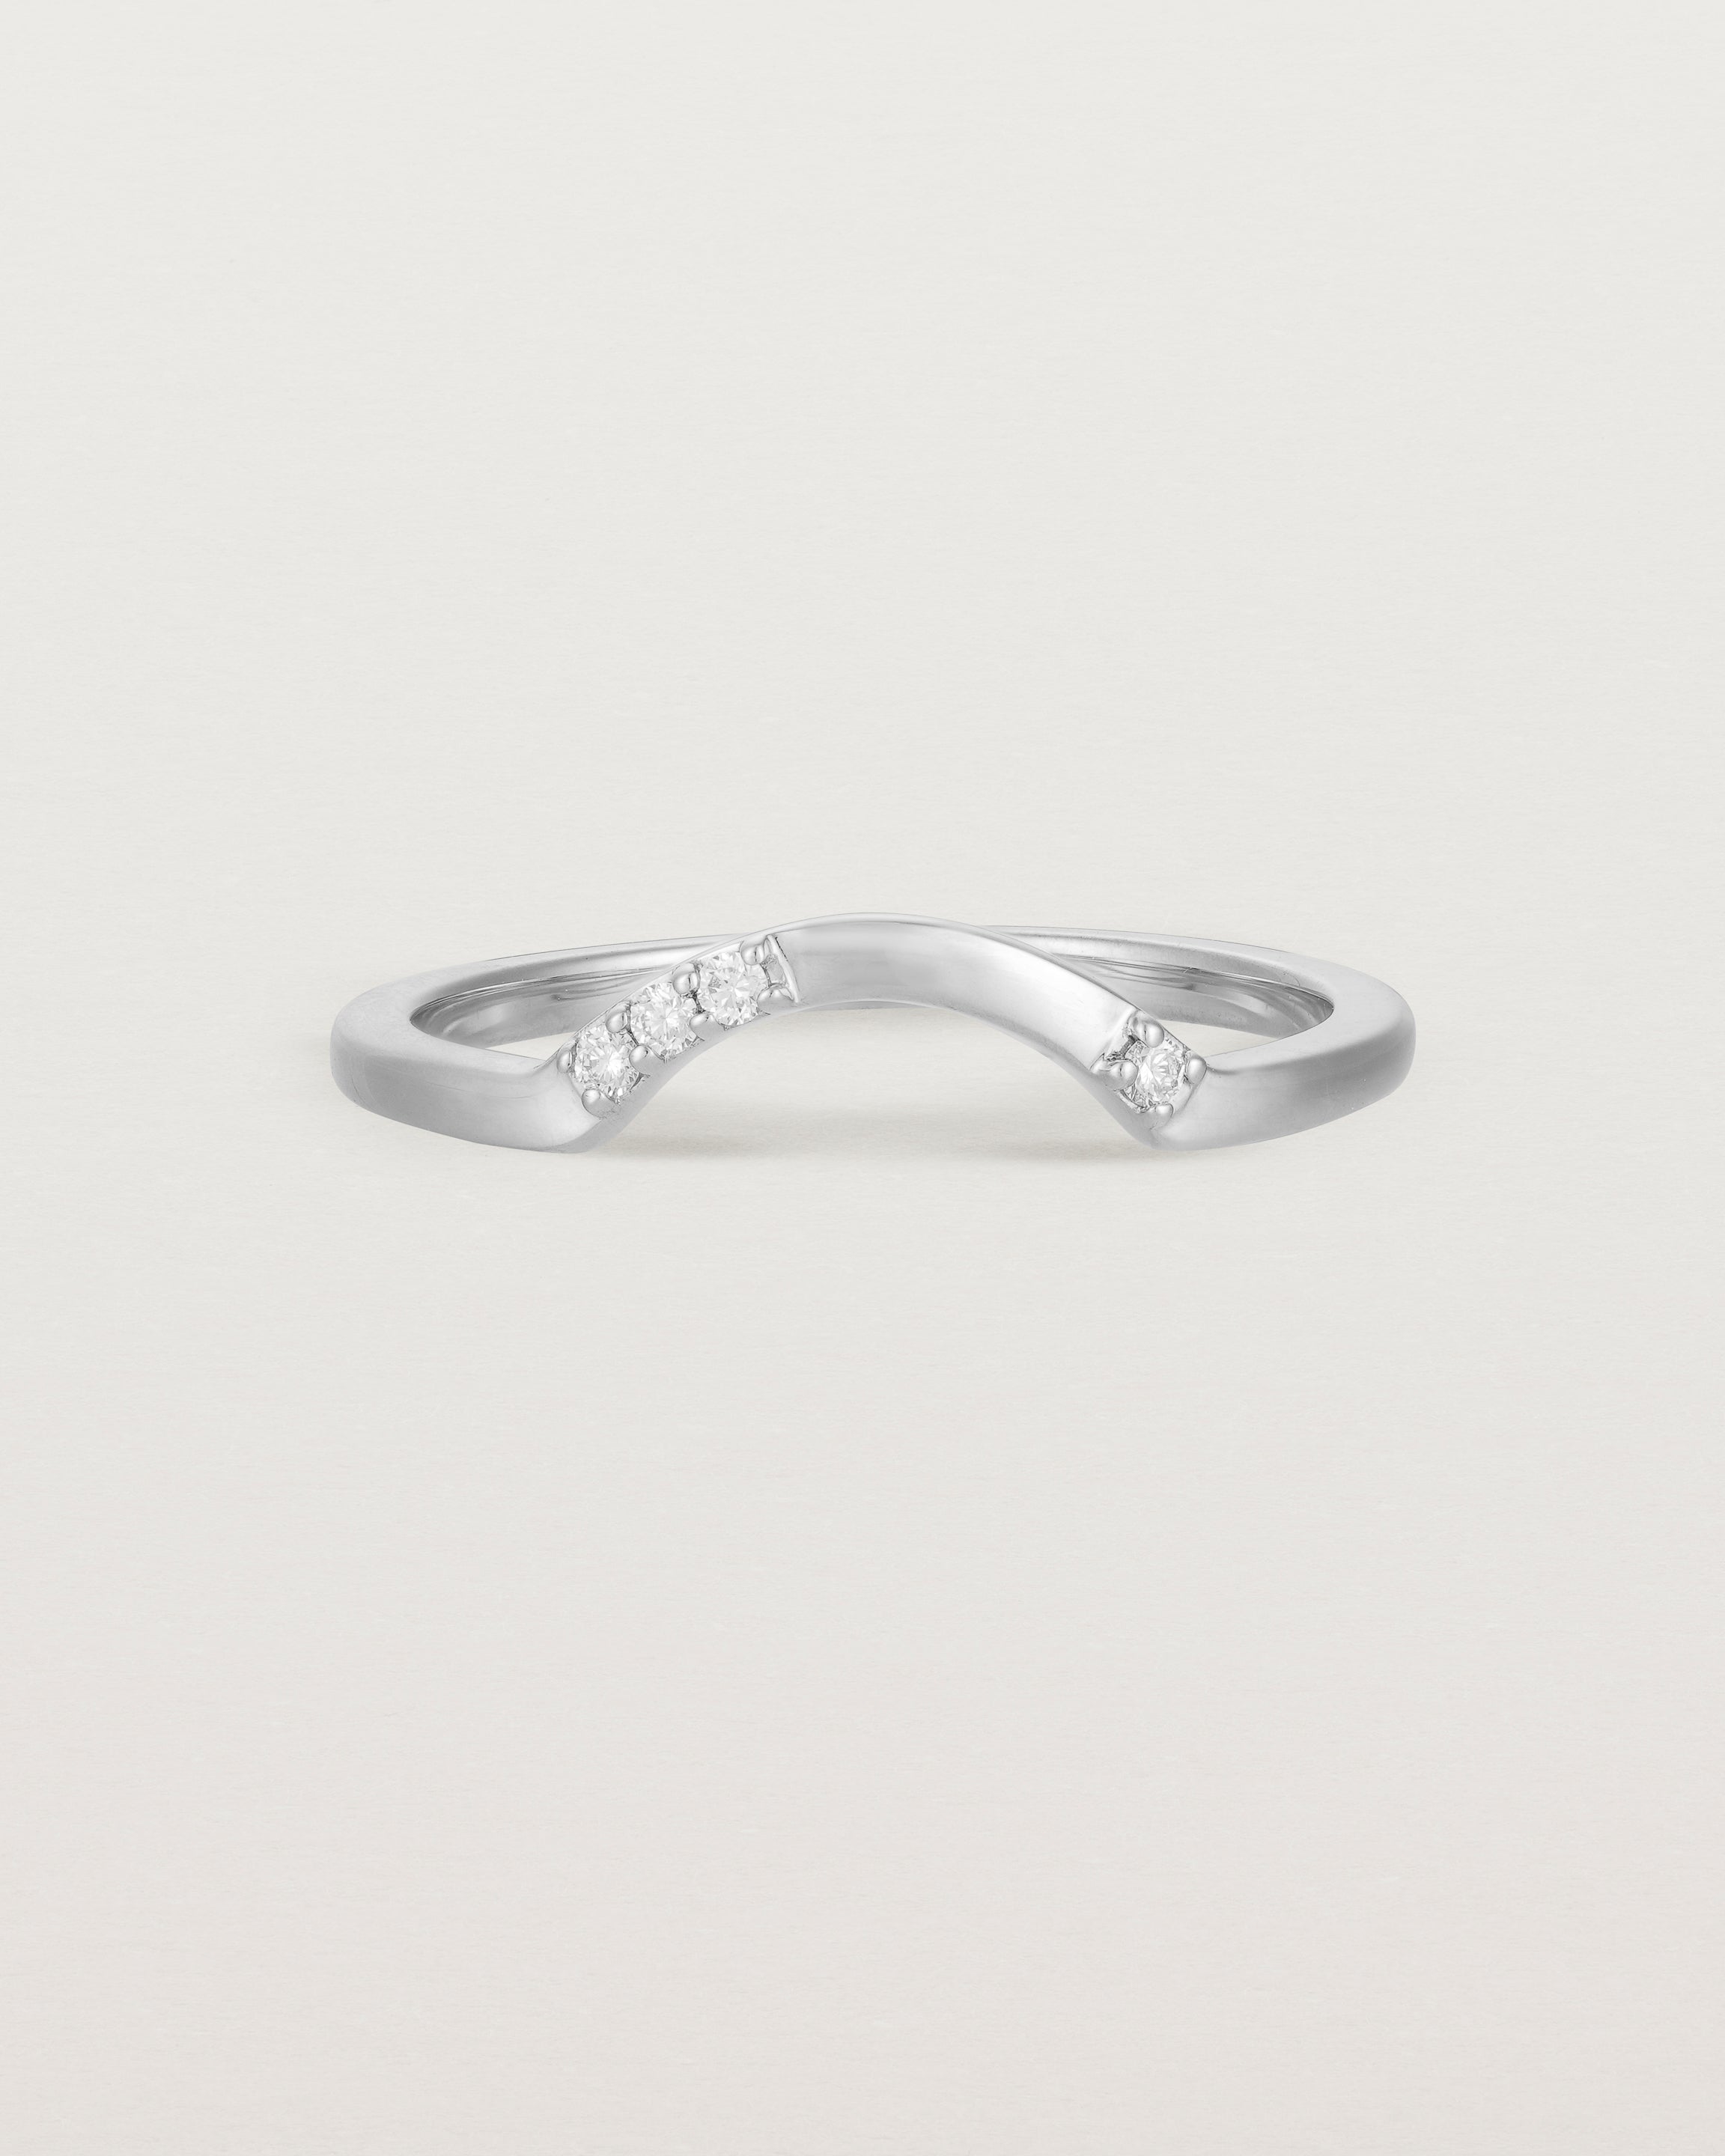 Fit three of a classic arc crown ring featuring scattered white diamonds, crafted in white gold